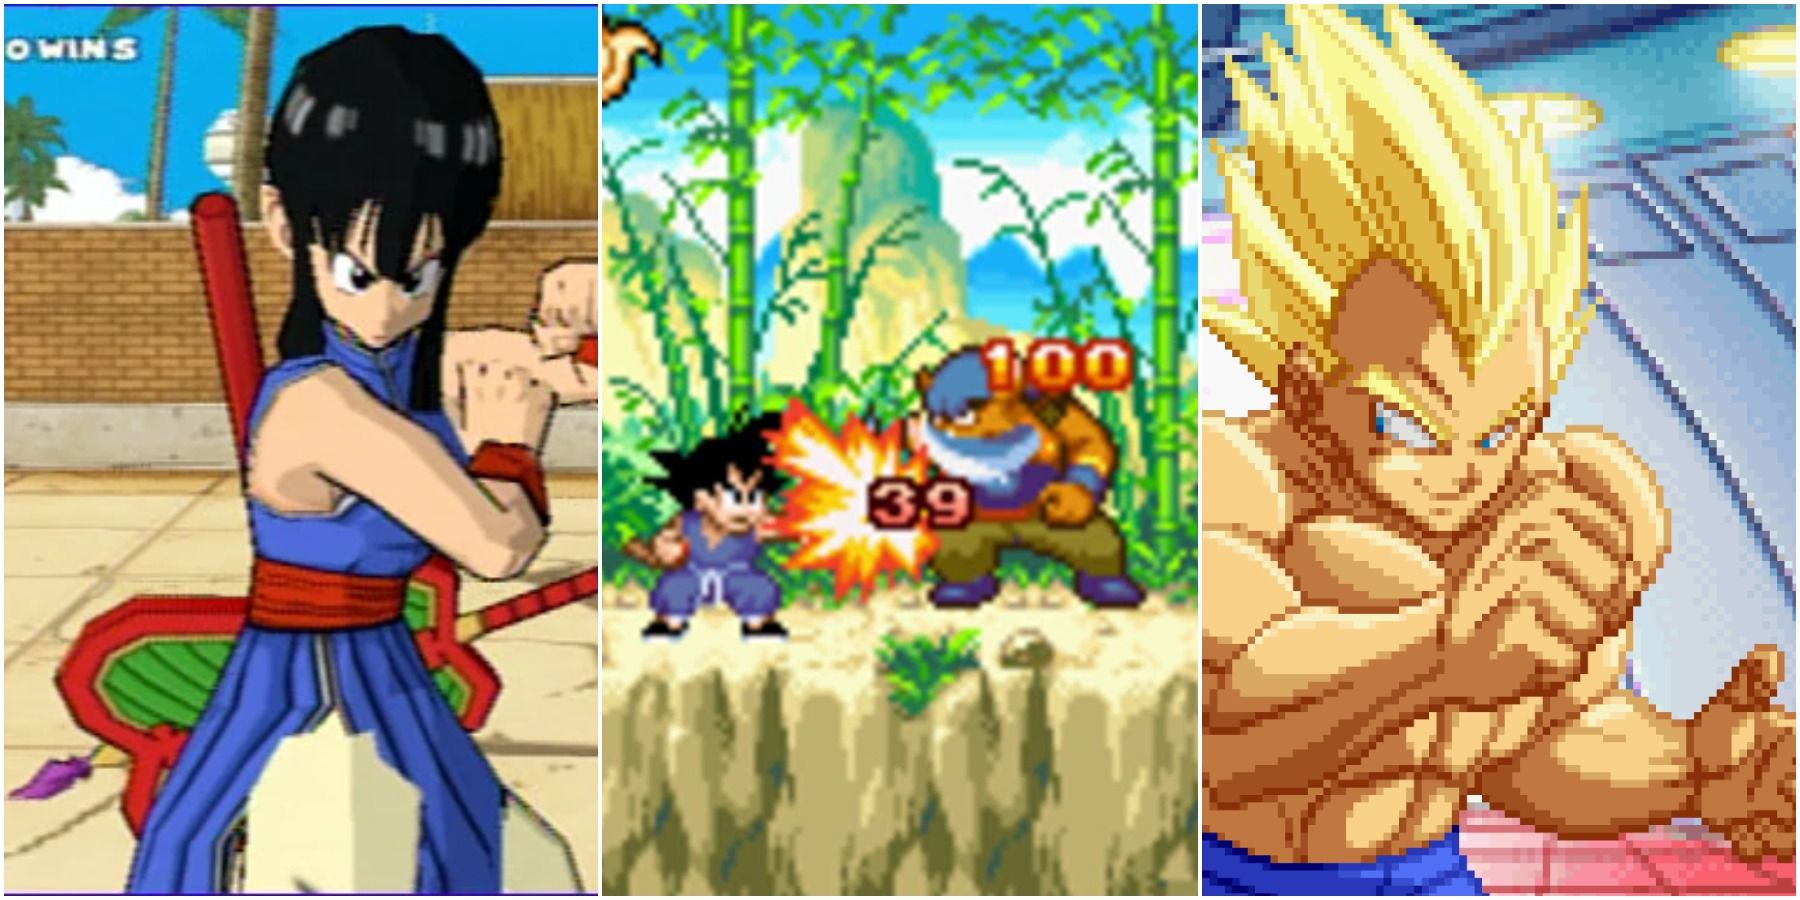 Best Dragon Ball Games You Can Play On Roblox, Ranked 